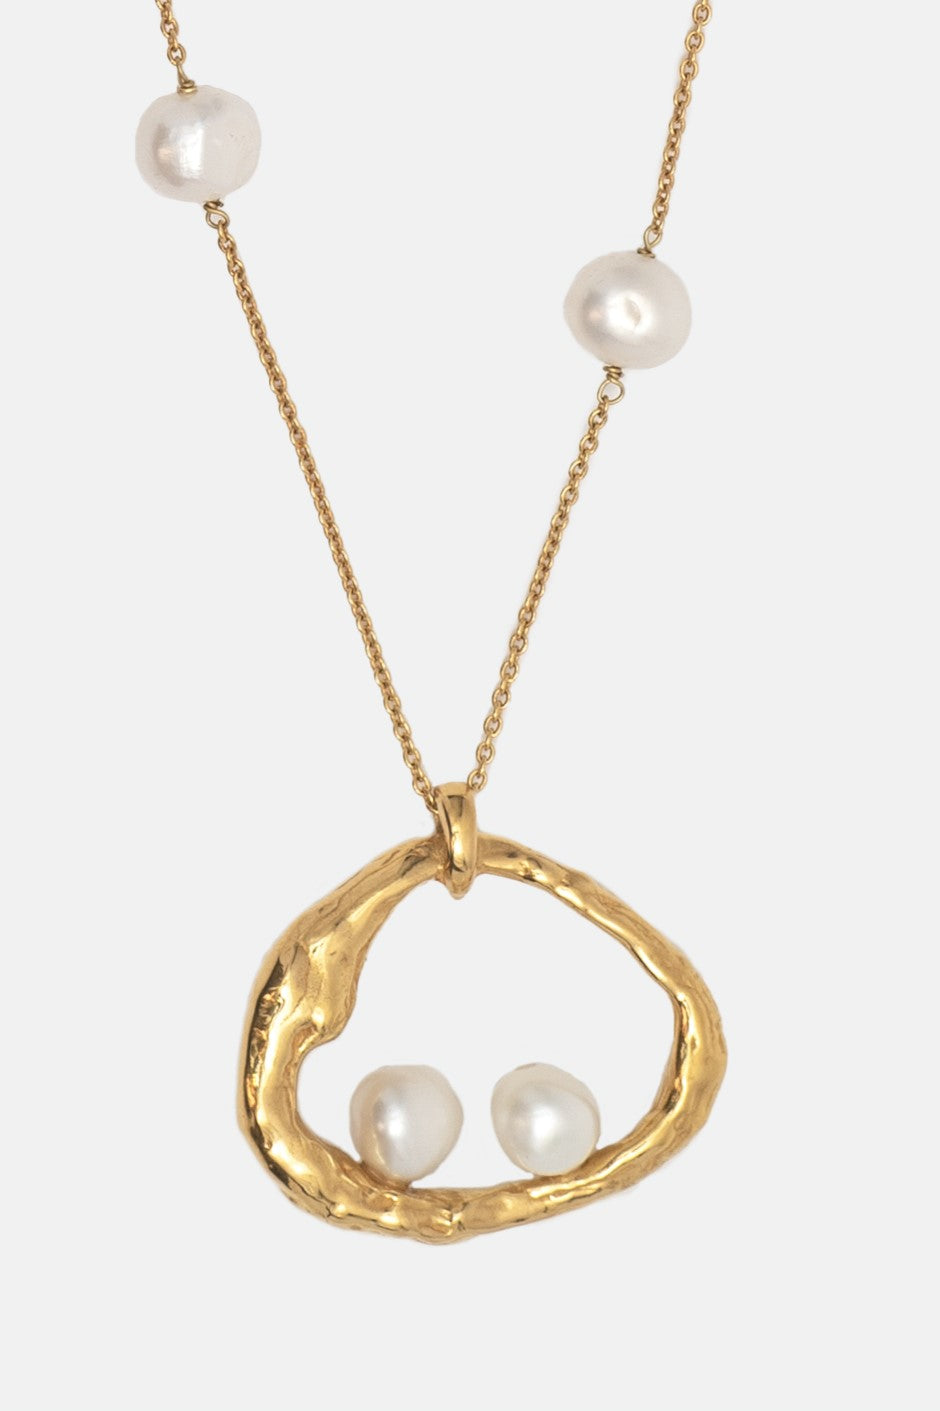 Oyster Oval Pearl & 18k Gold Statement Pendant Necklace Mamour Paris 